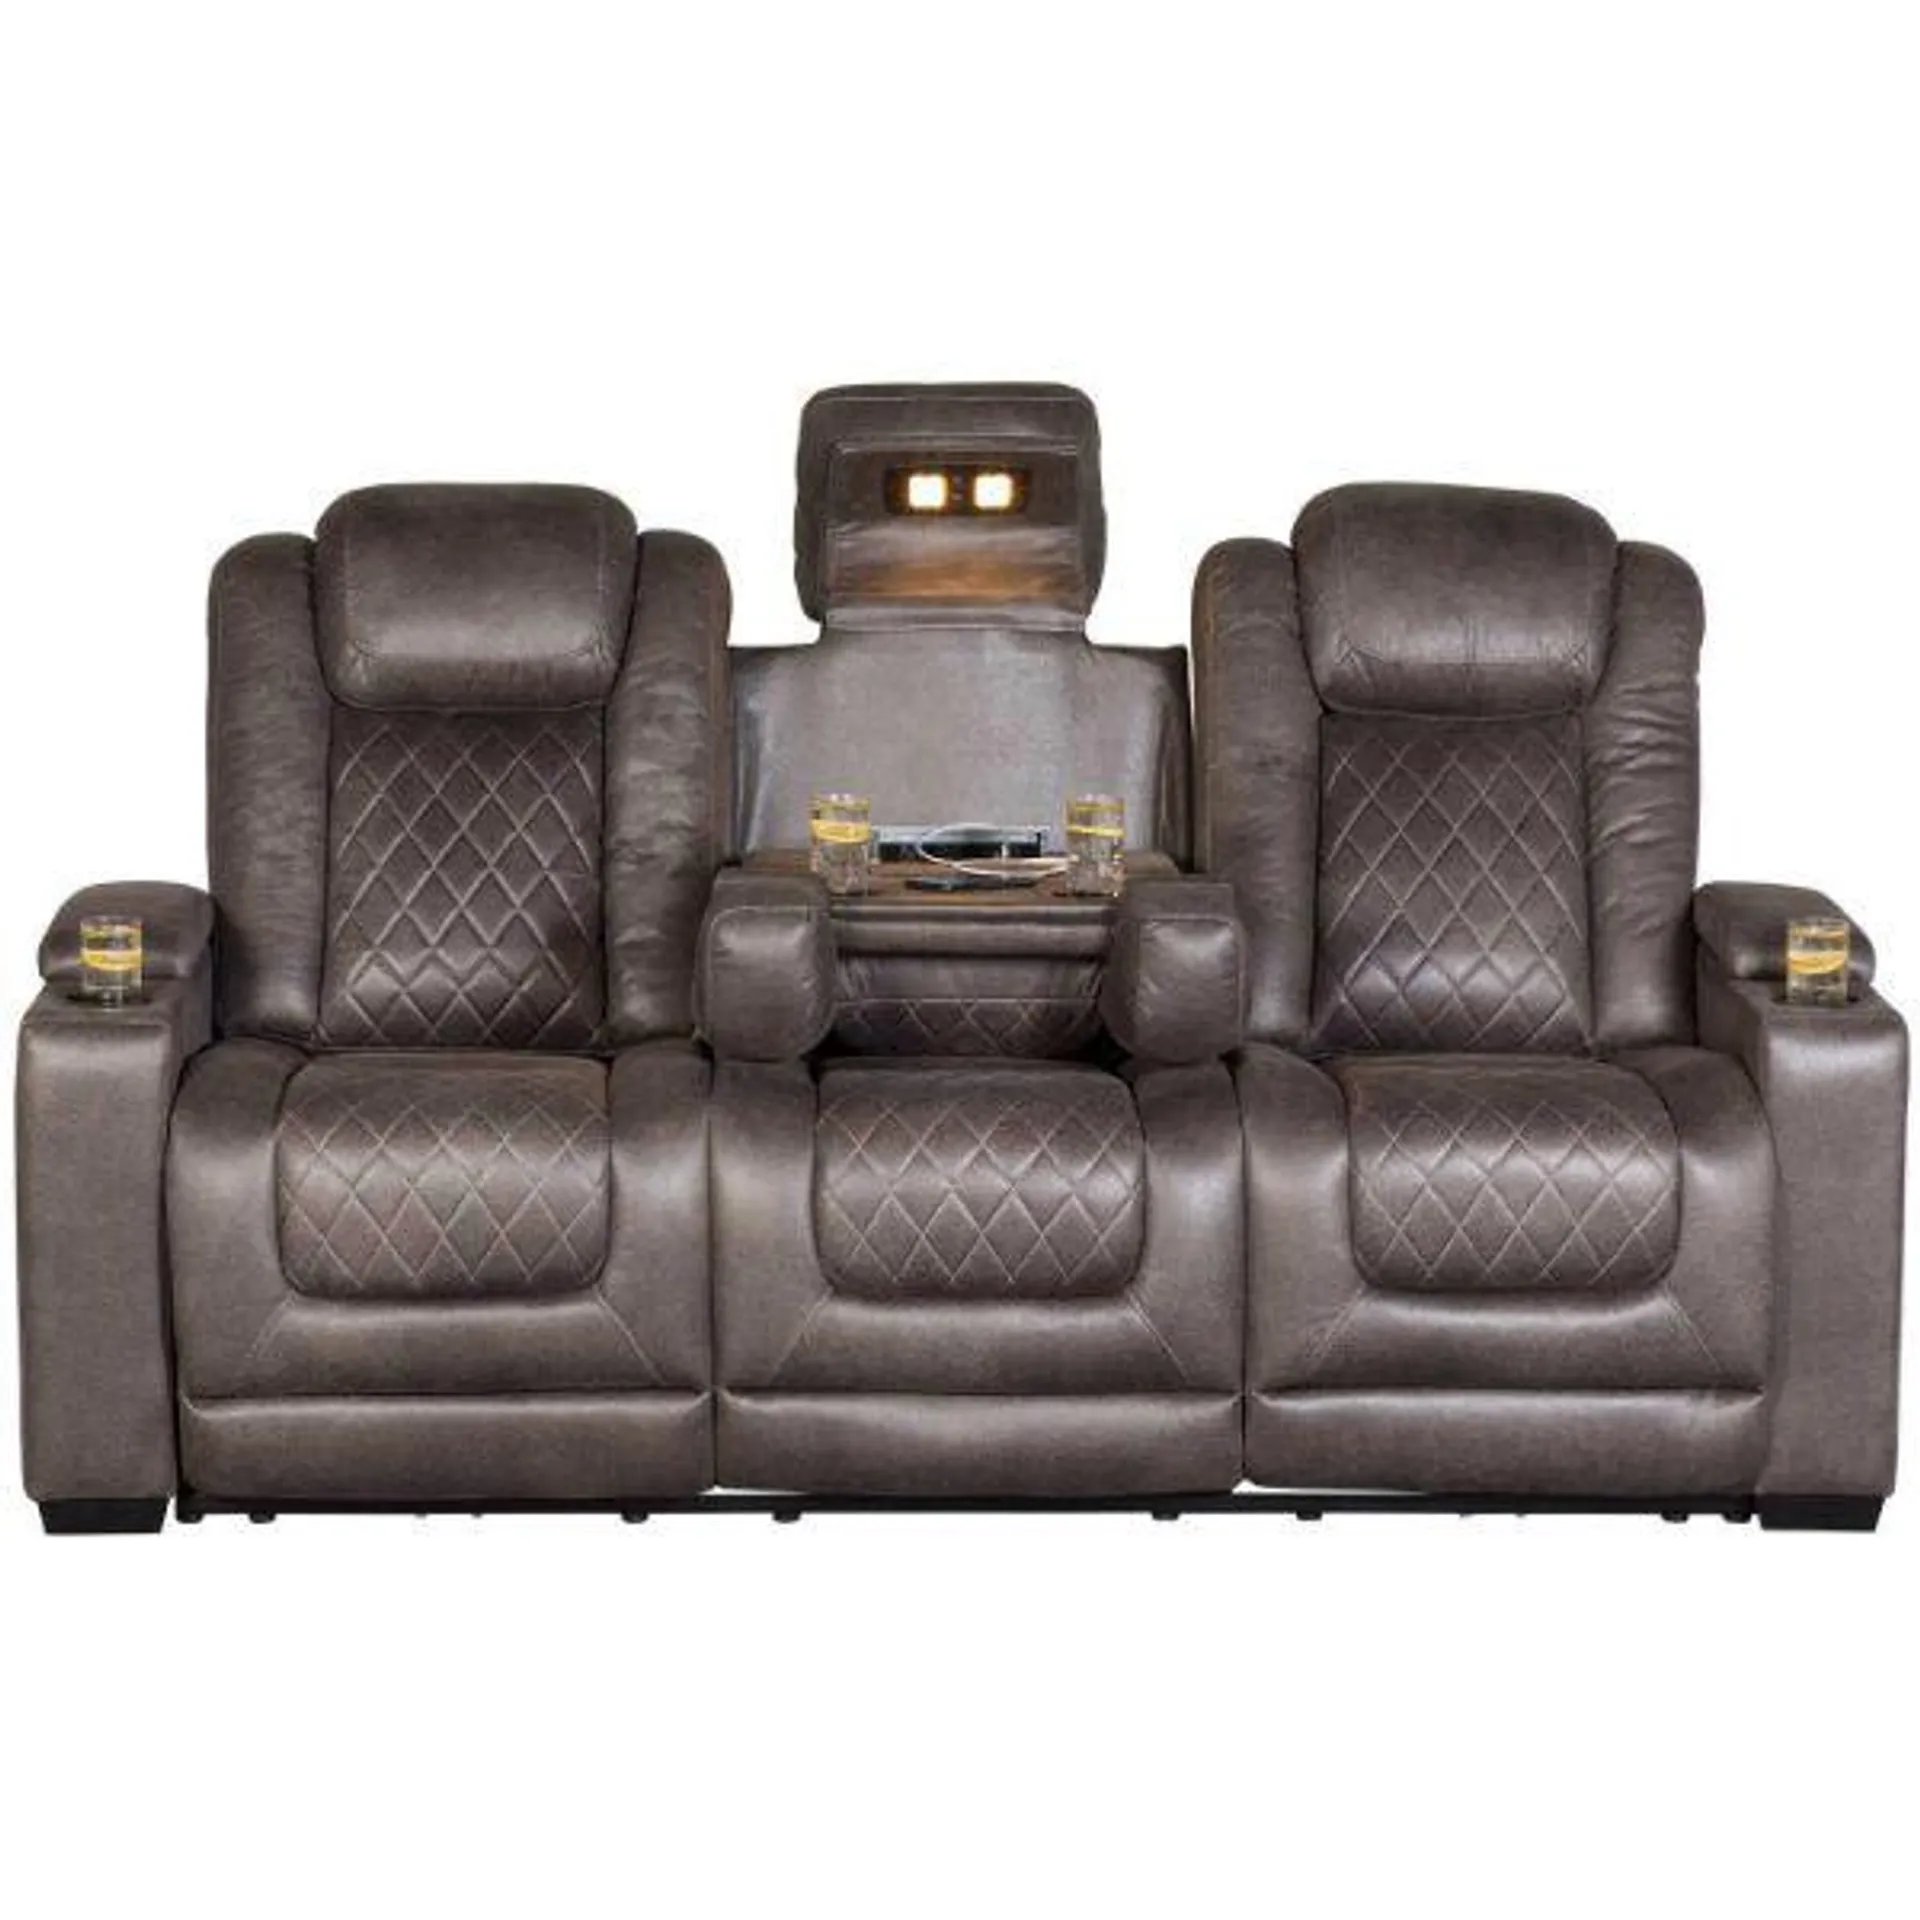 HyllMont Dual Power Reclining Sofa with Drop Down